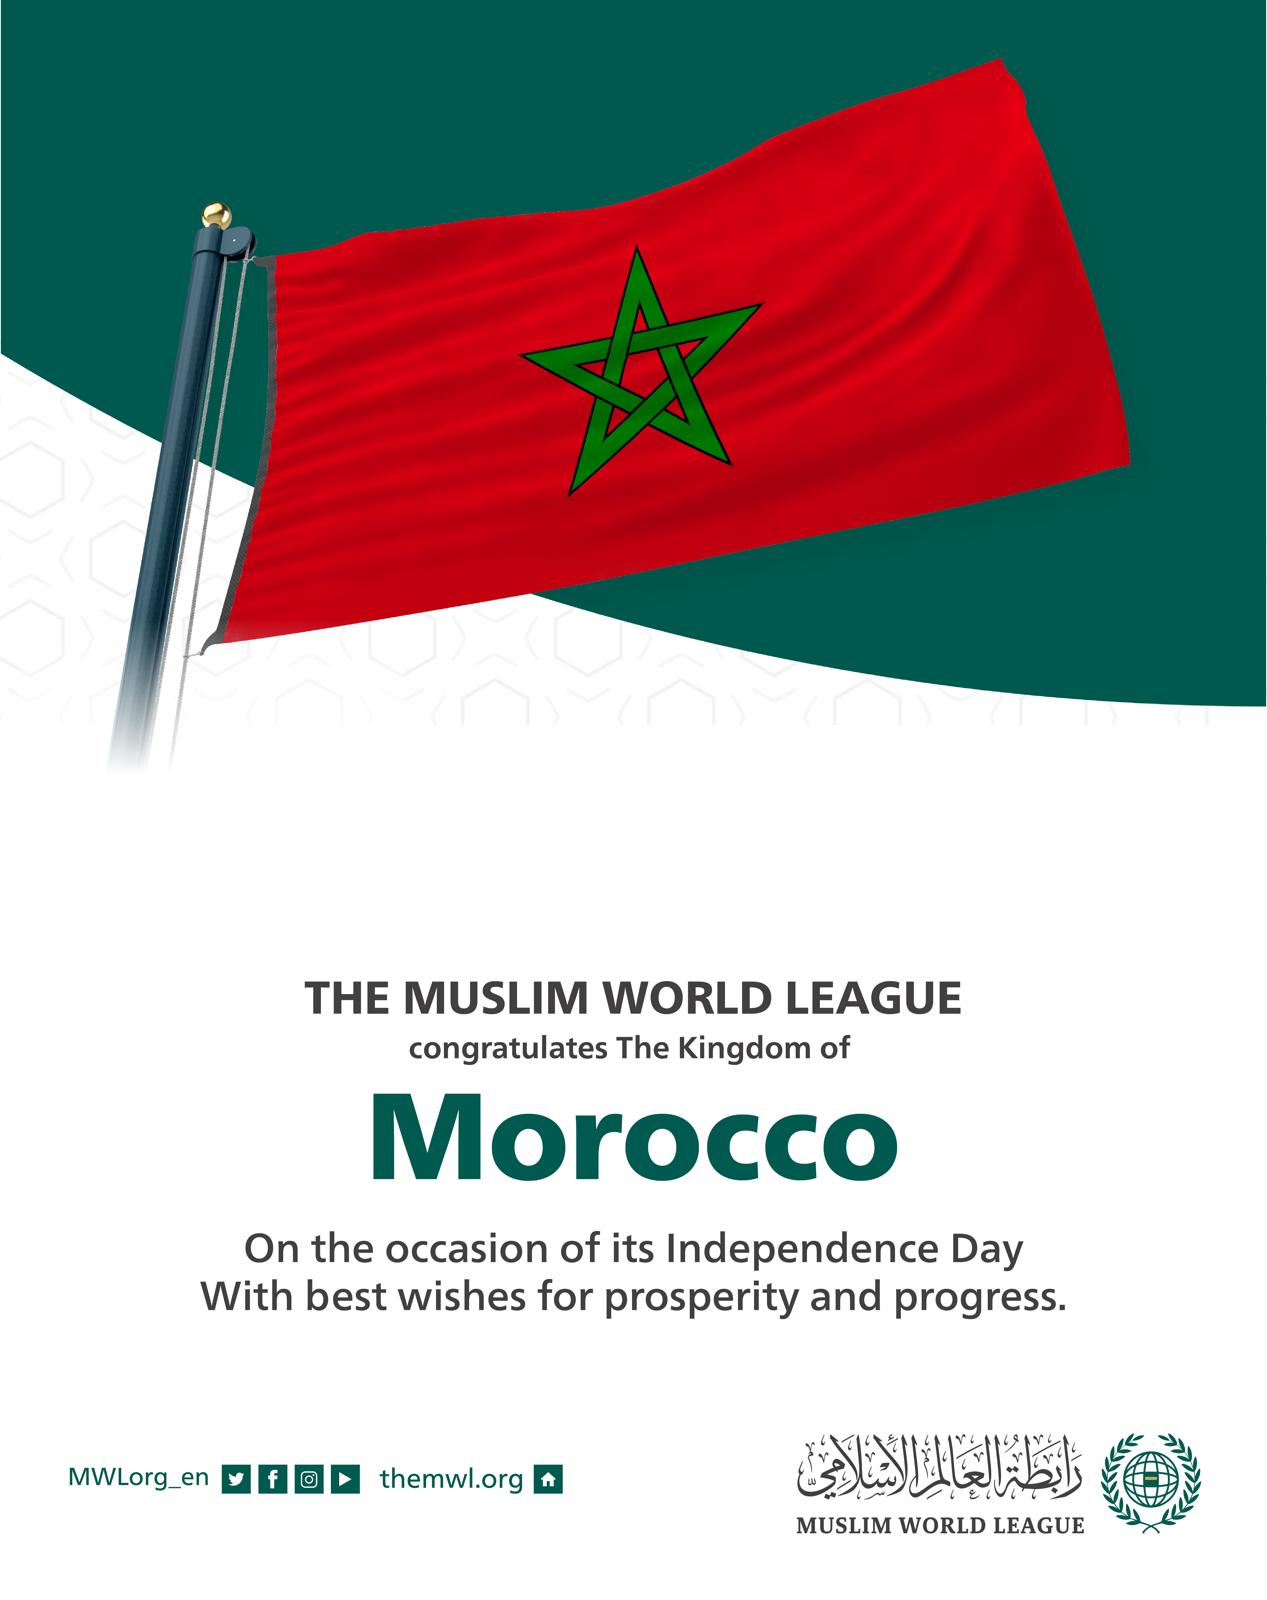 The Muslim World League congratulates the Kingdom of Morocco on the occasion of its Independence Day: